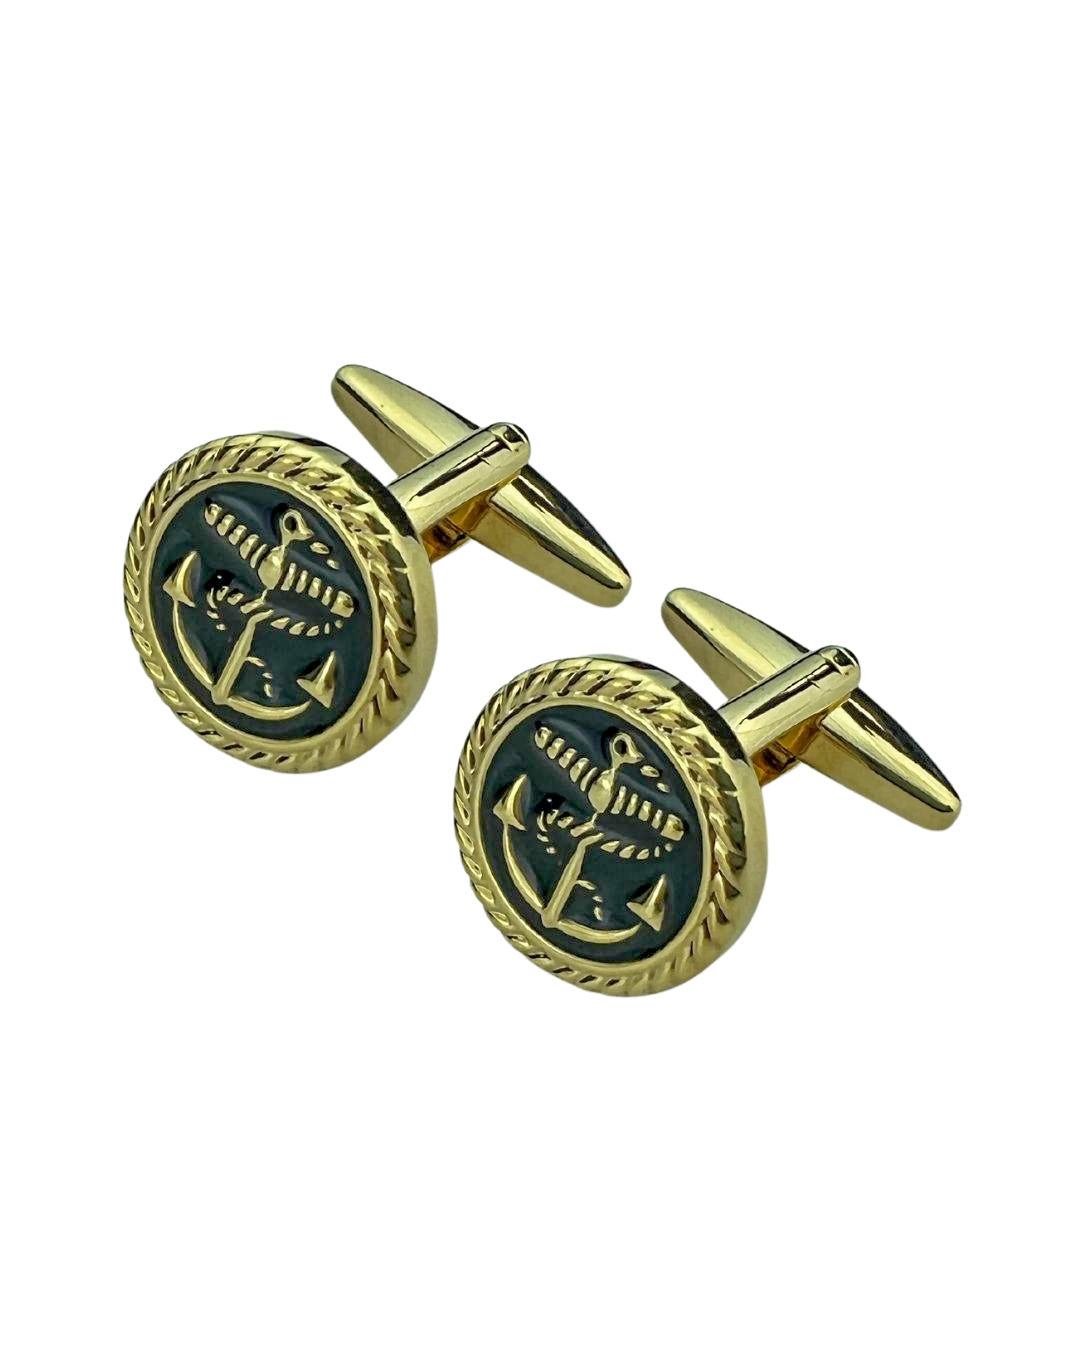 Round Gold Cufflinks With Rope & Anchor Enamel